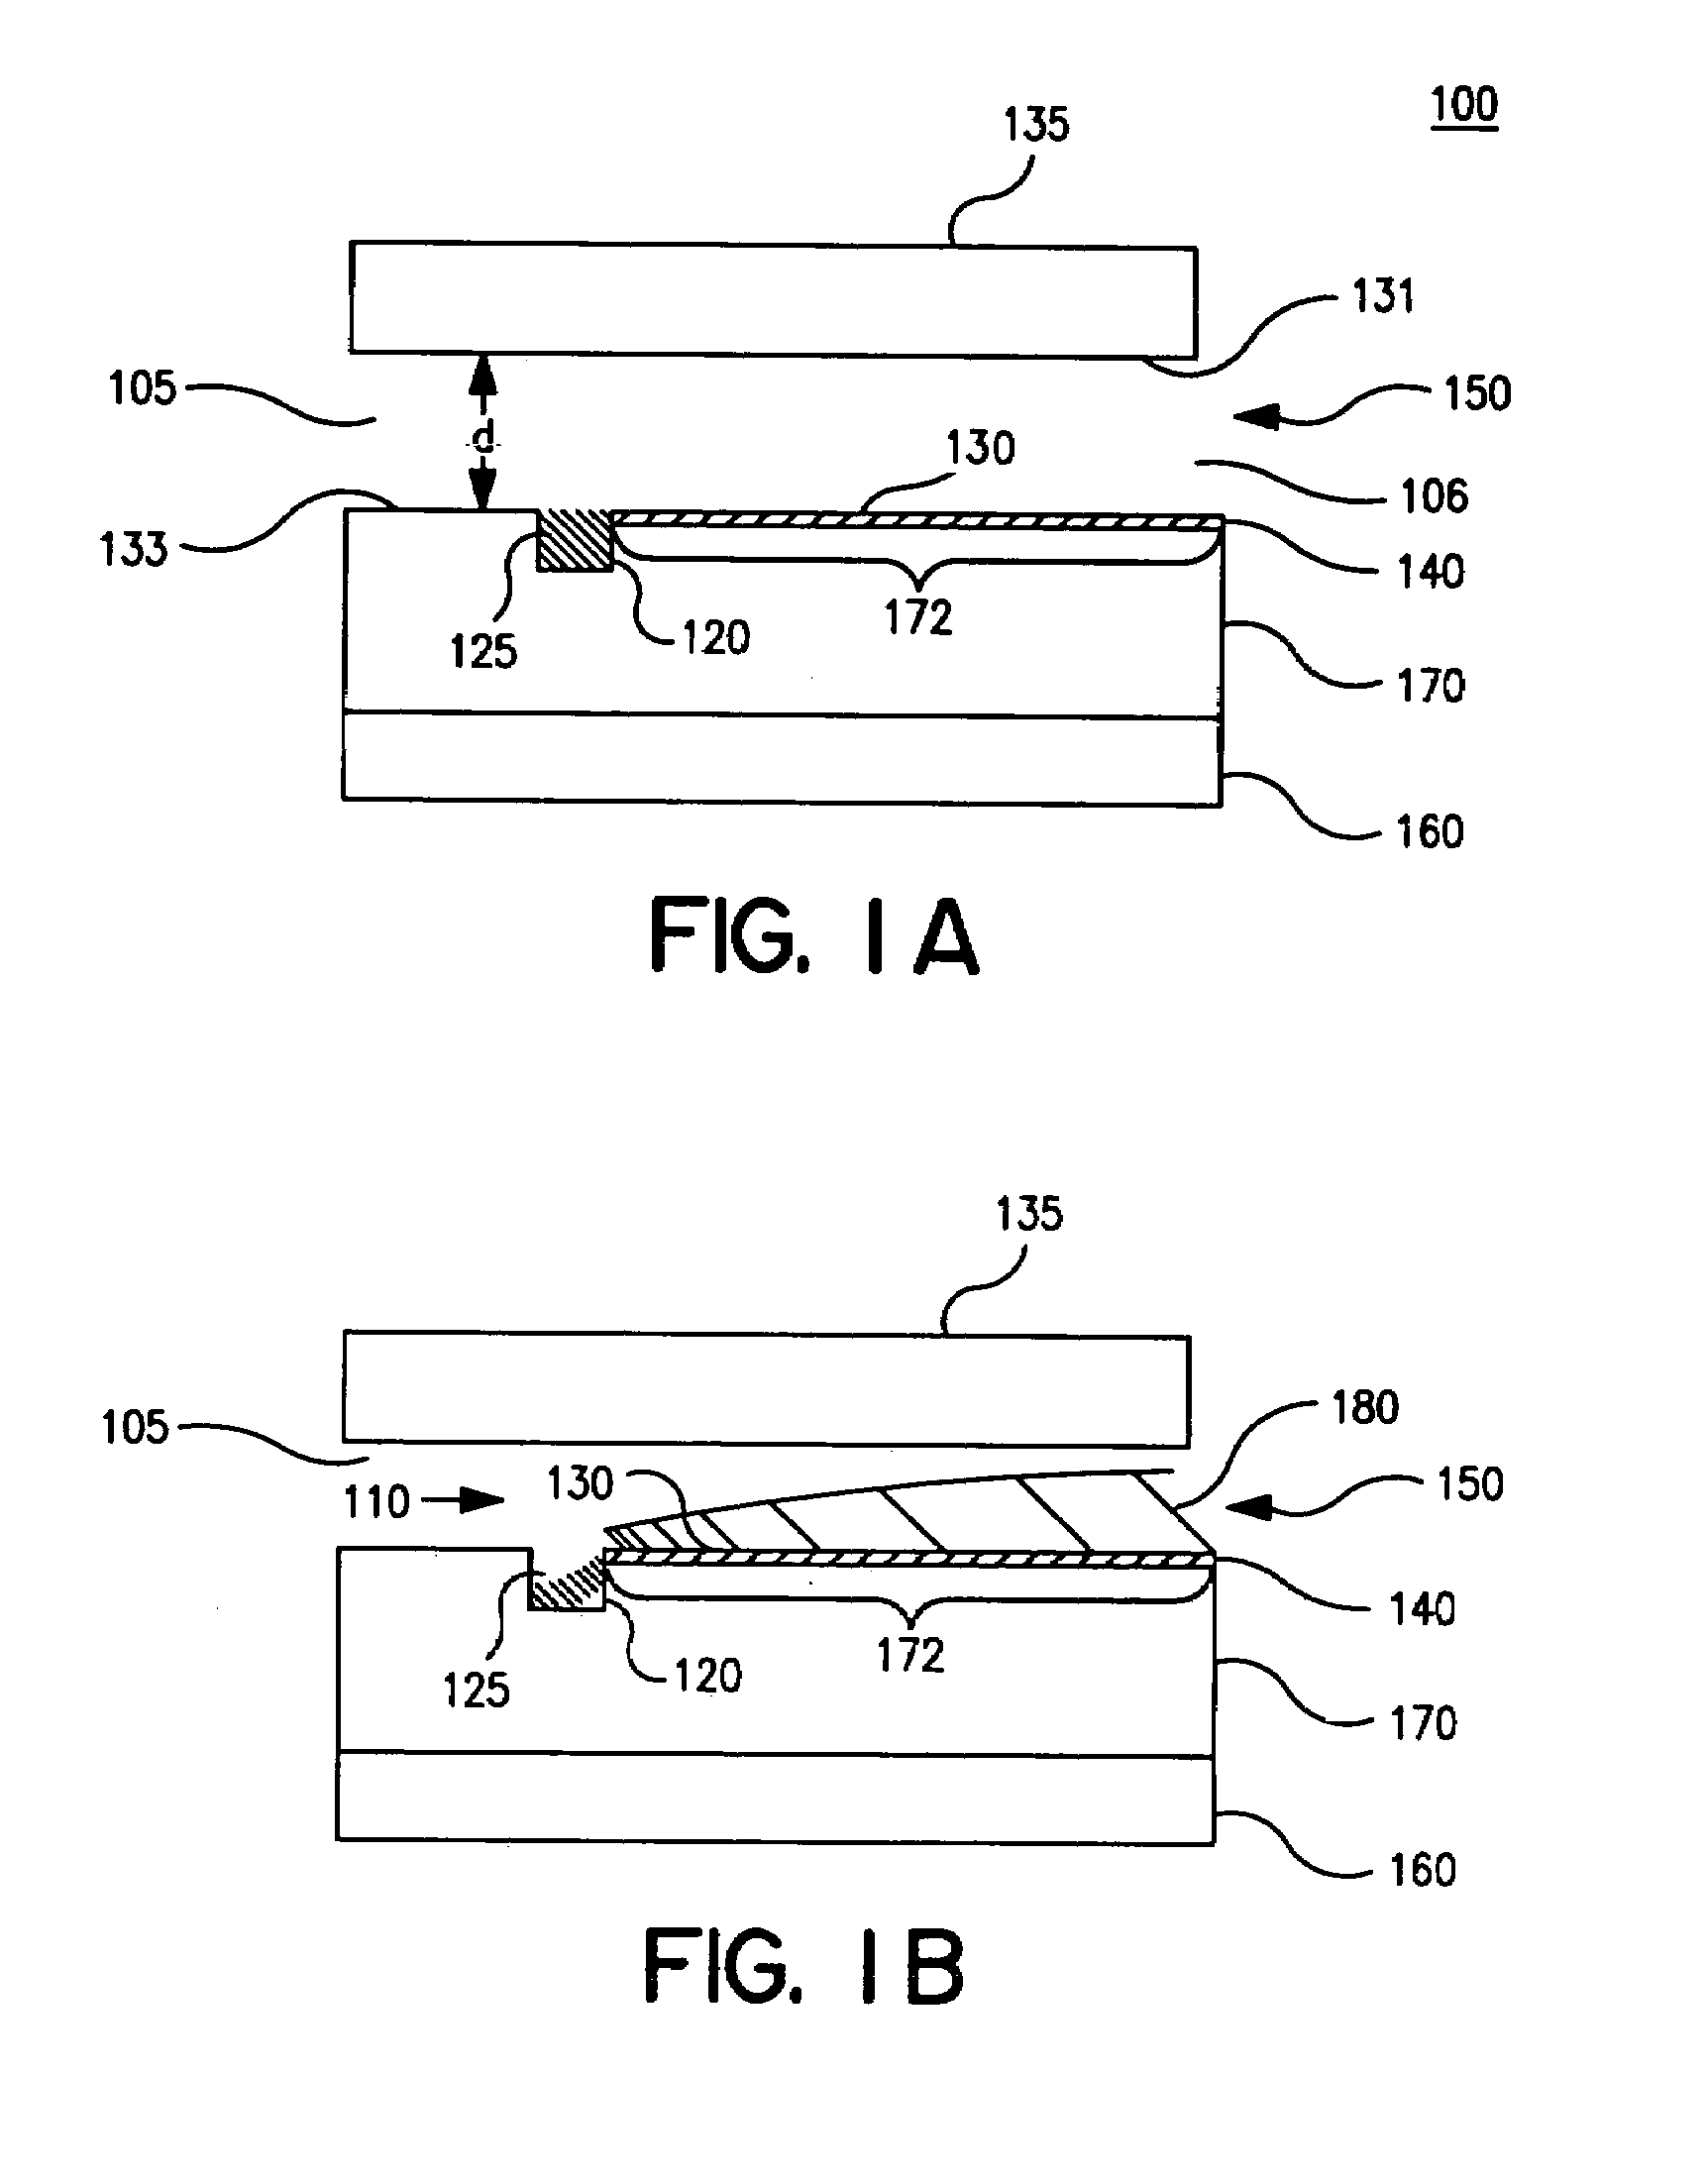 Microfluidic device and surface decoration process for solid phase affinity binding assays